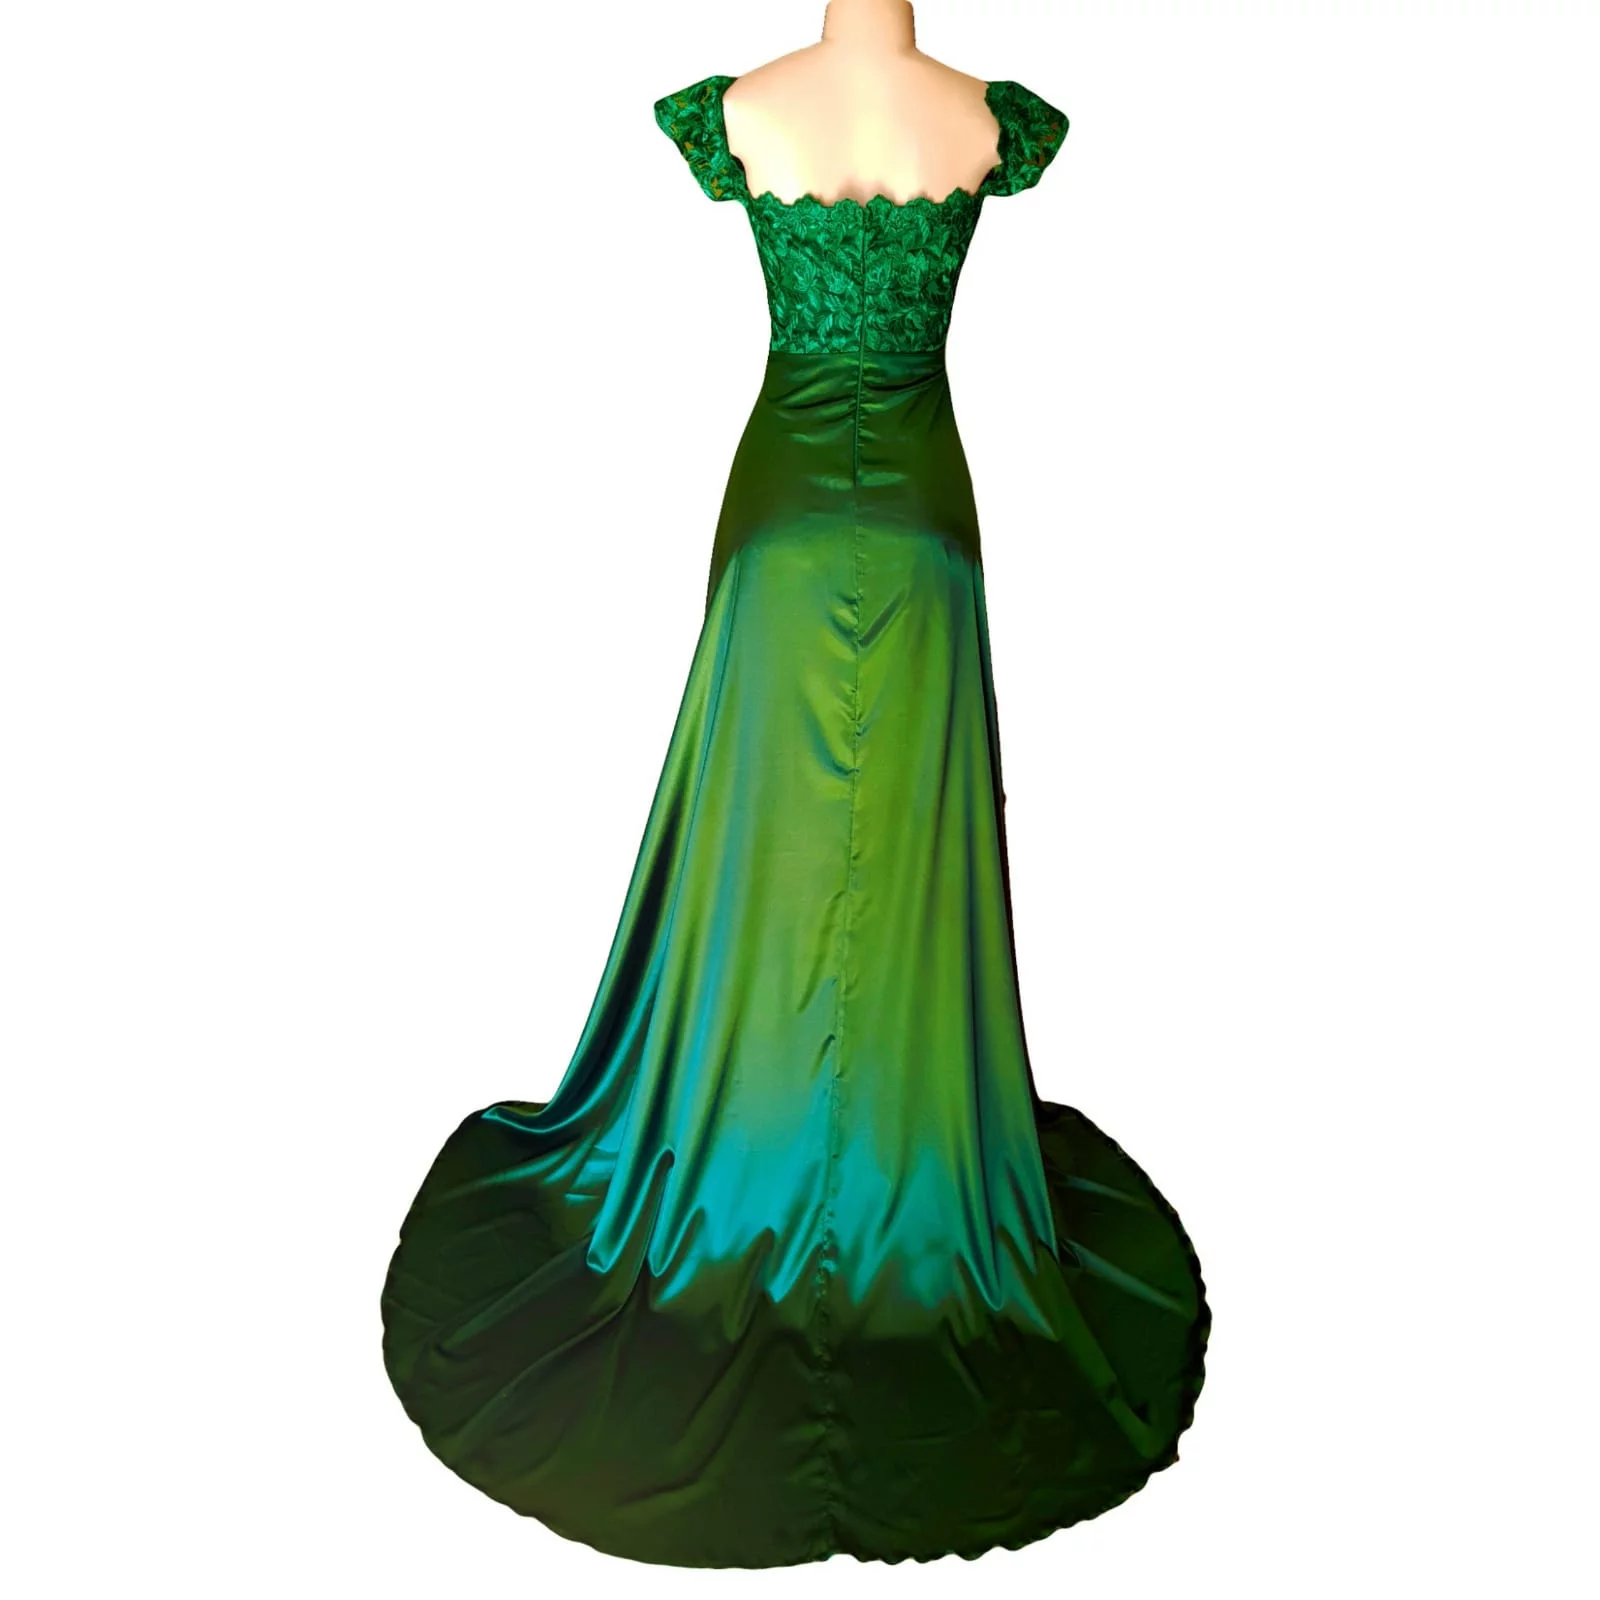 Emerald green satin and lace off shoulder matric farewell dress 3 emerald green satin and lace off shoulder matric farewell dress with a slit and a train and off shoulder cap sleeves.